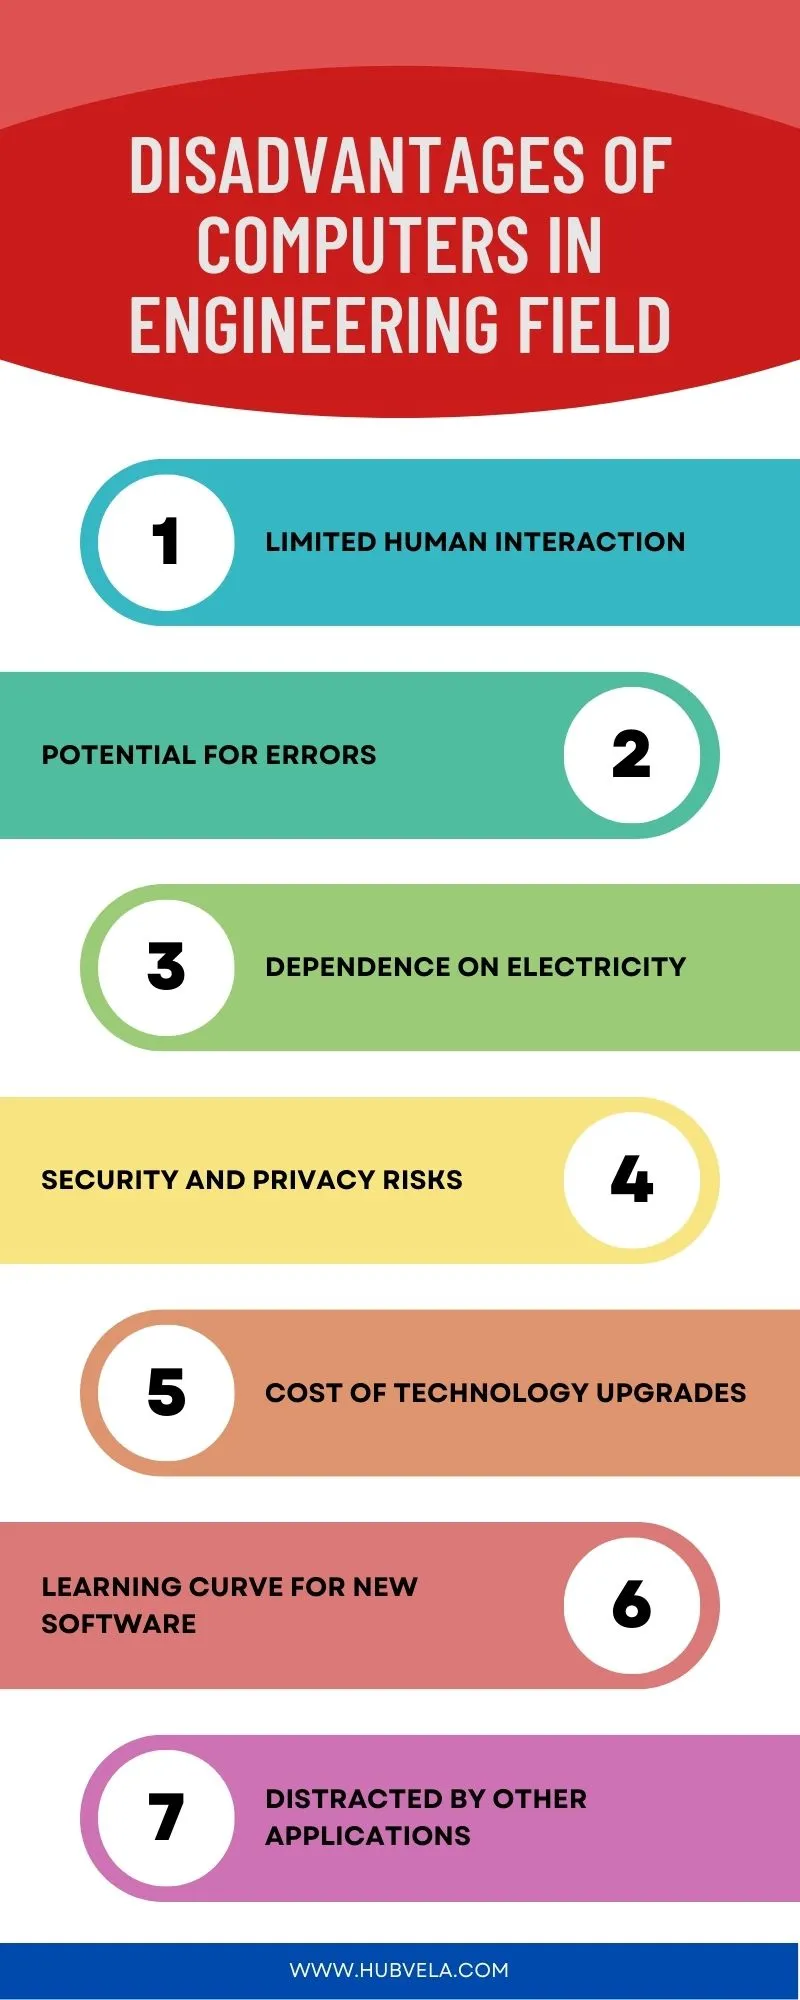 Disadvantages of Computers in Engineering Field Infographic